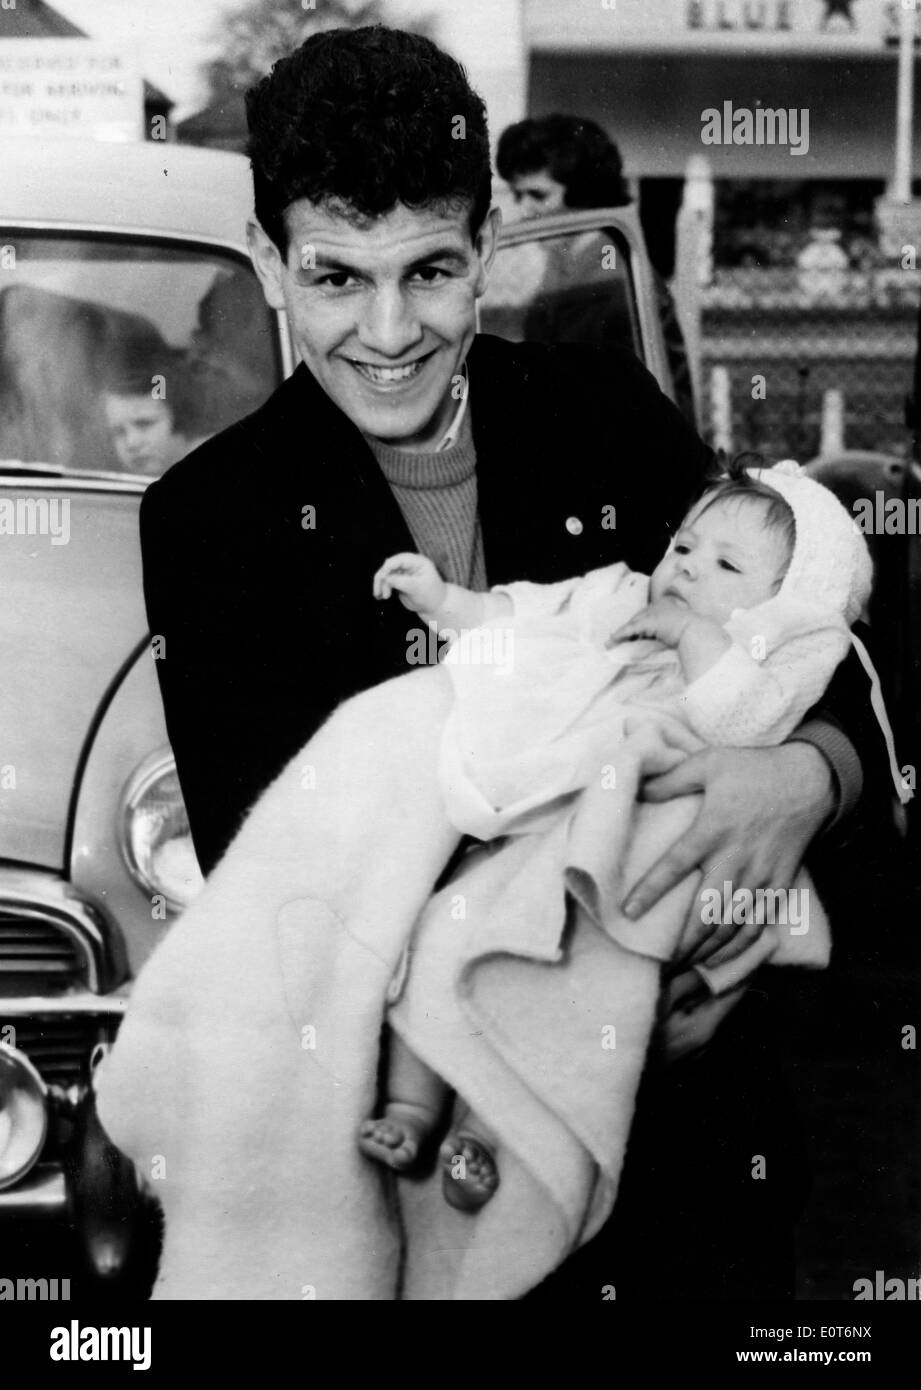 Boxer Dai Dower holding a baby Stock Photo